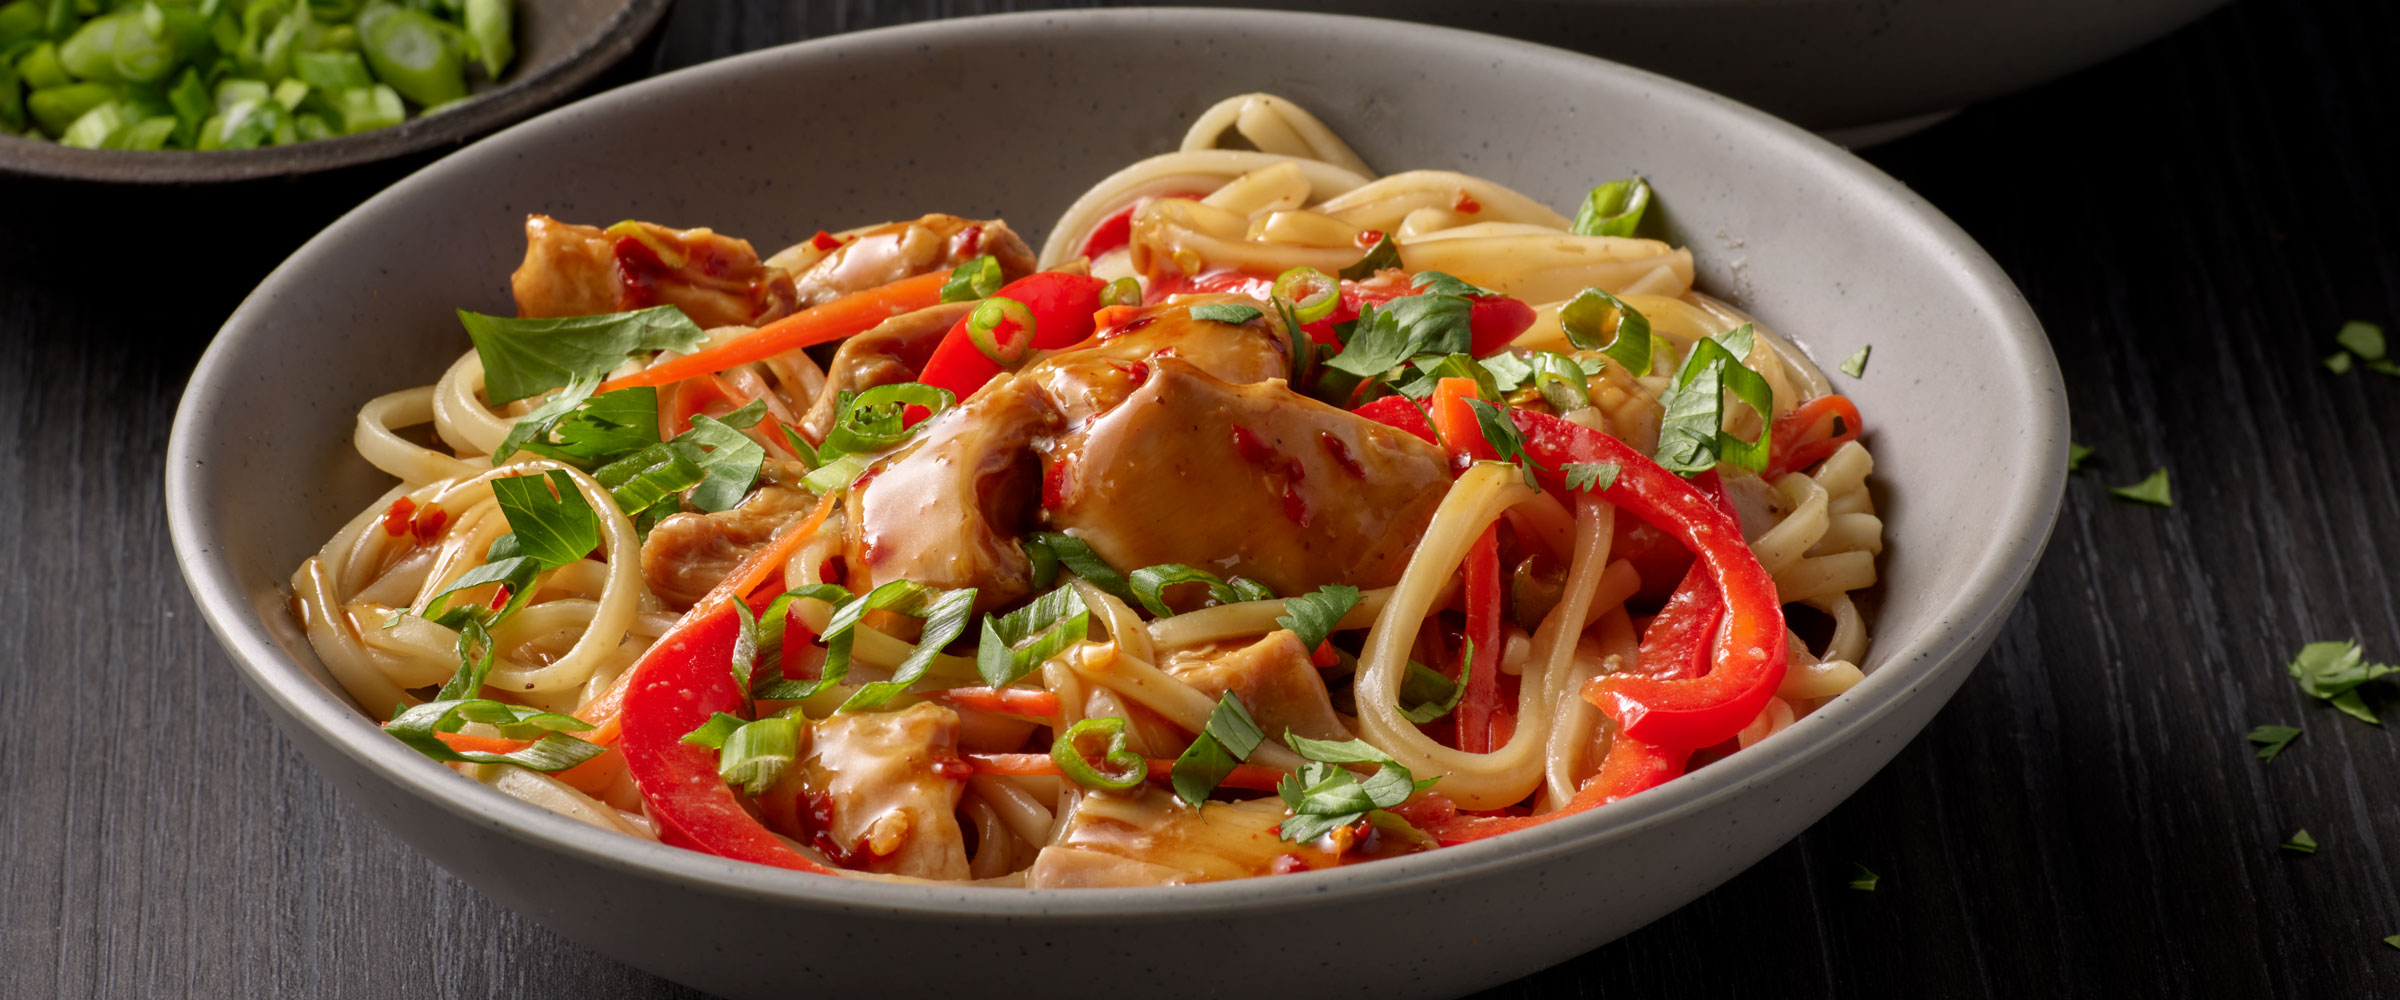 Spicy Ginger Chicken Over Pad Thai Noodles